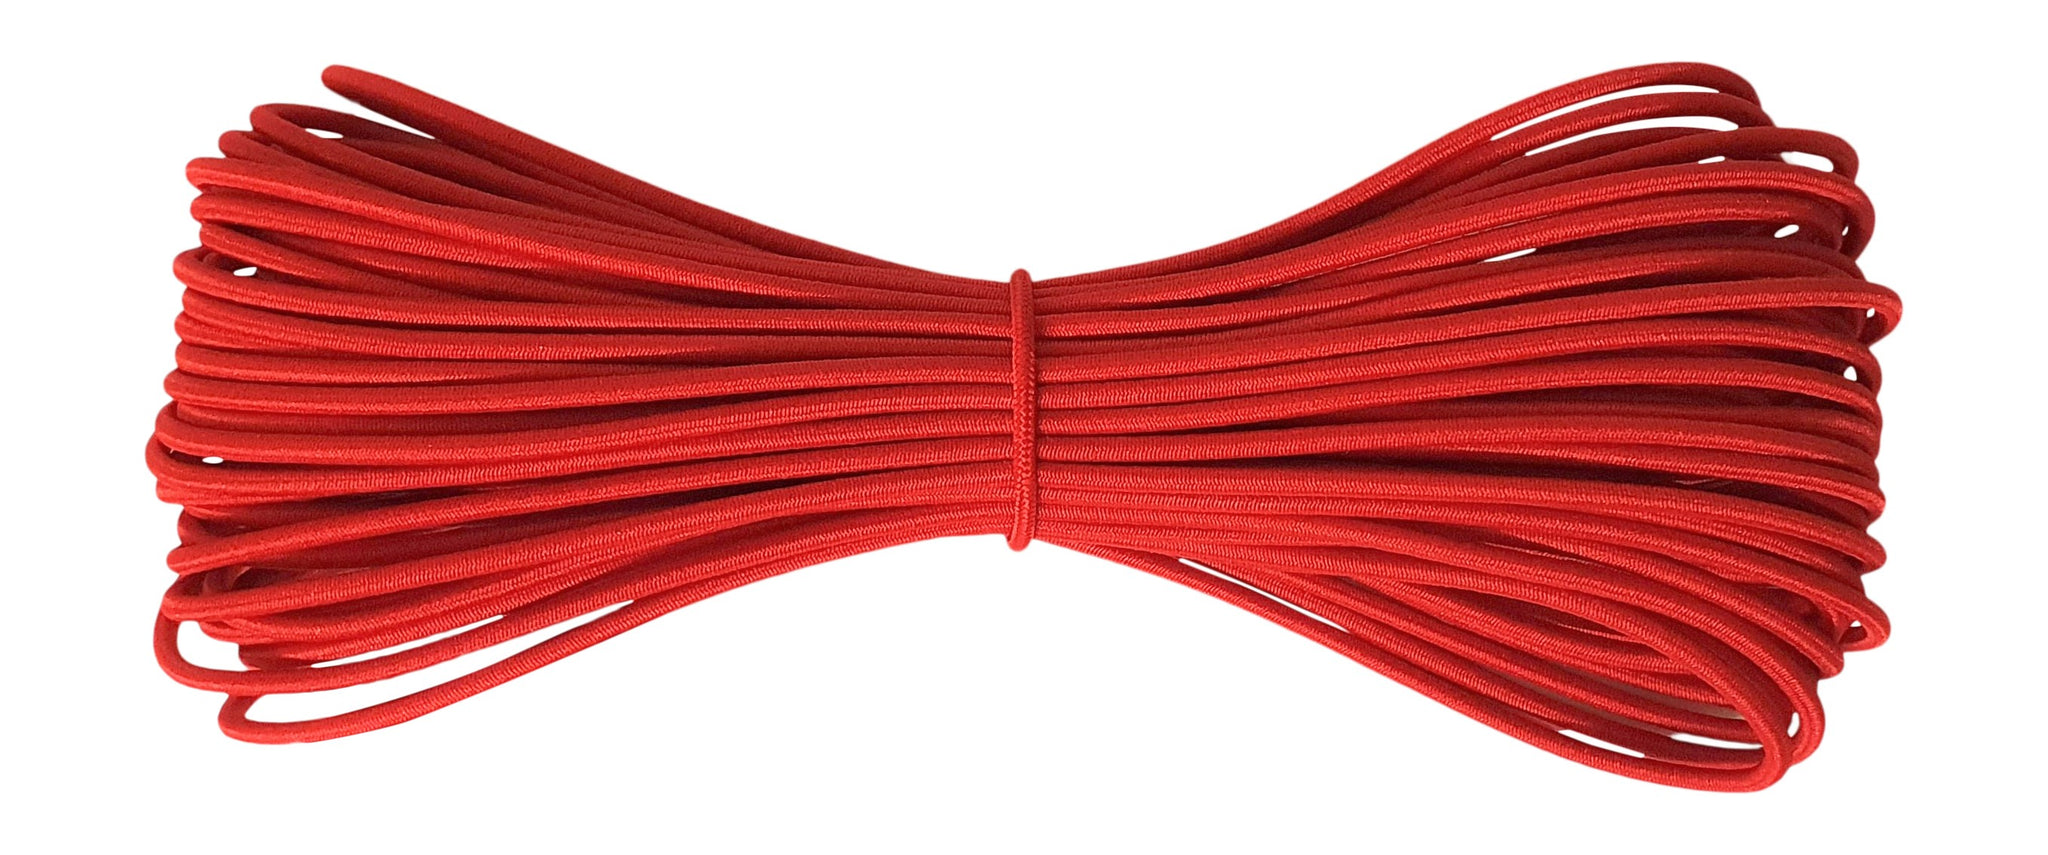 Fabmania round elastic cord red 2 mm